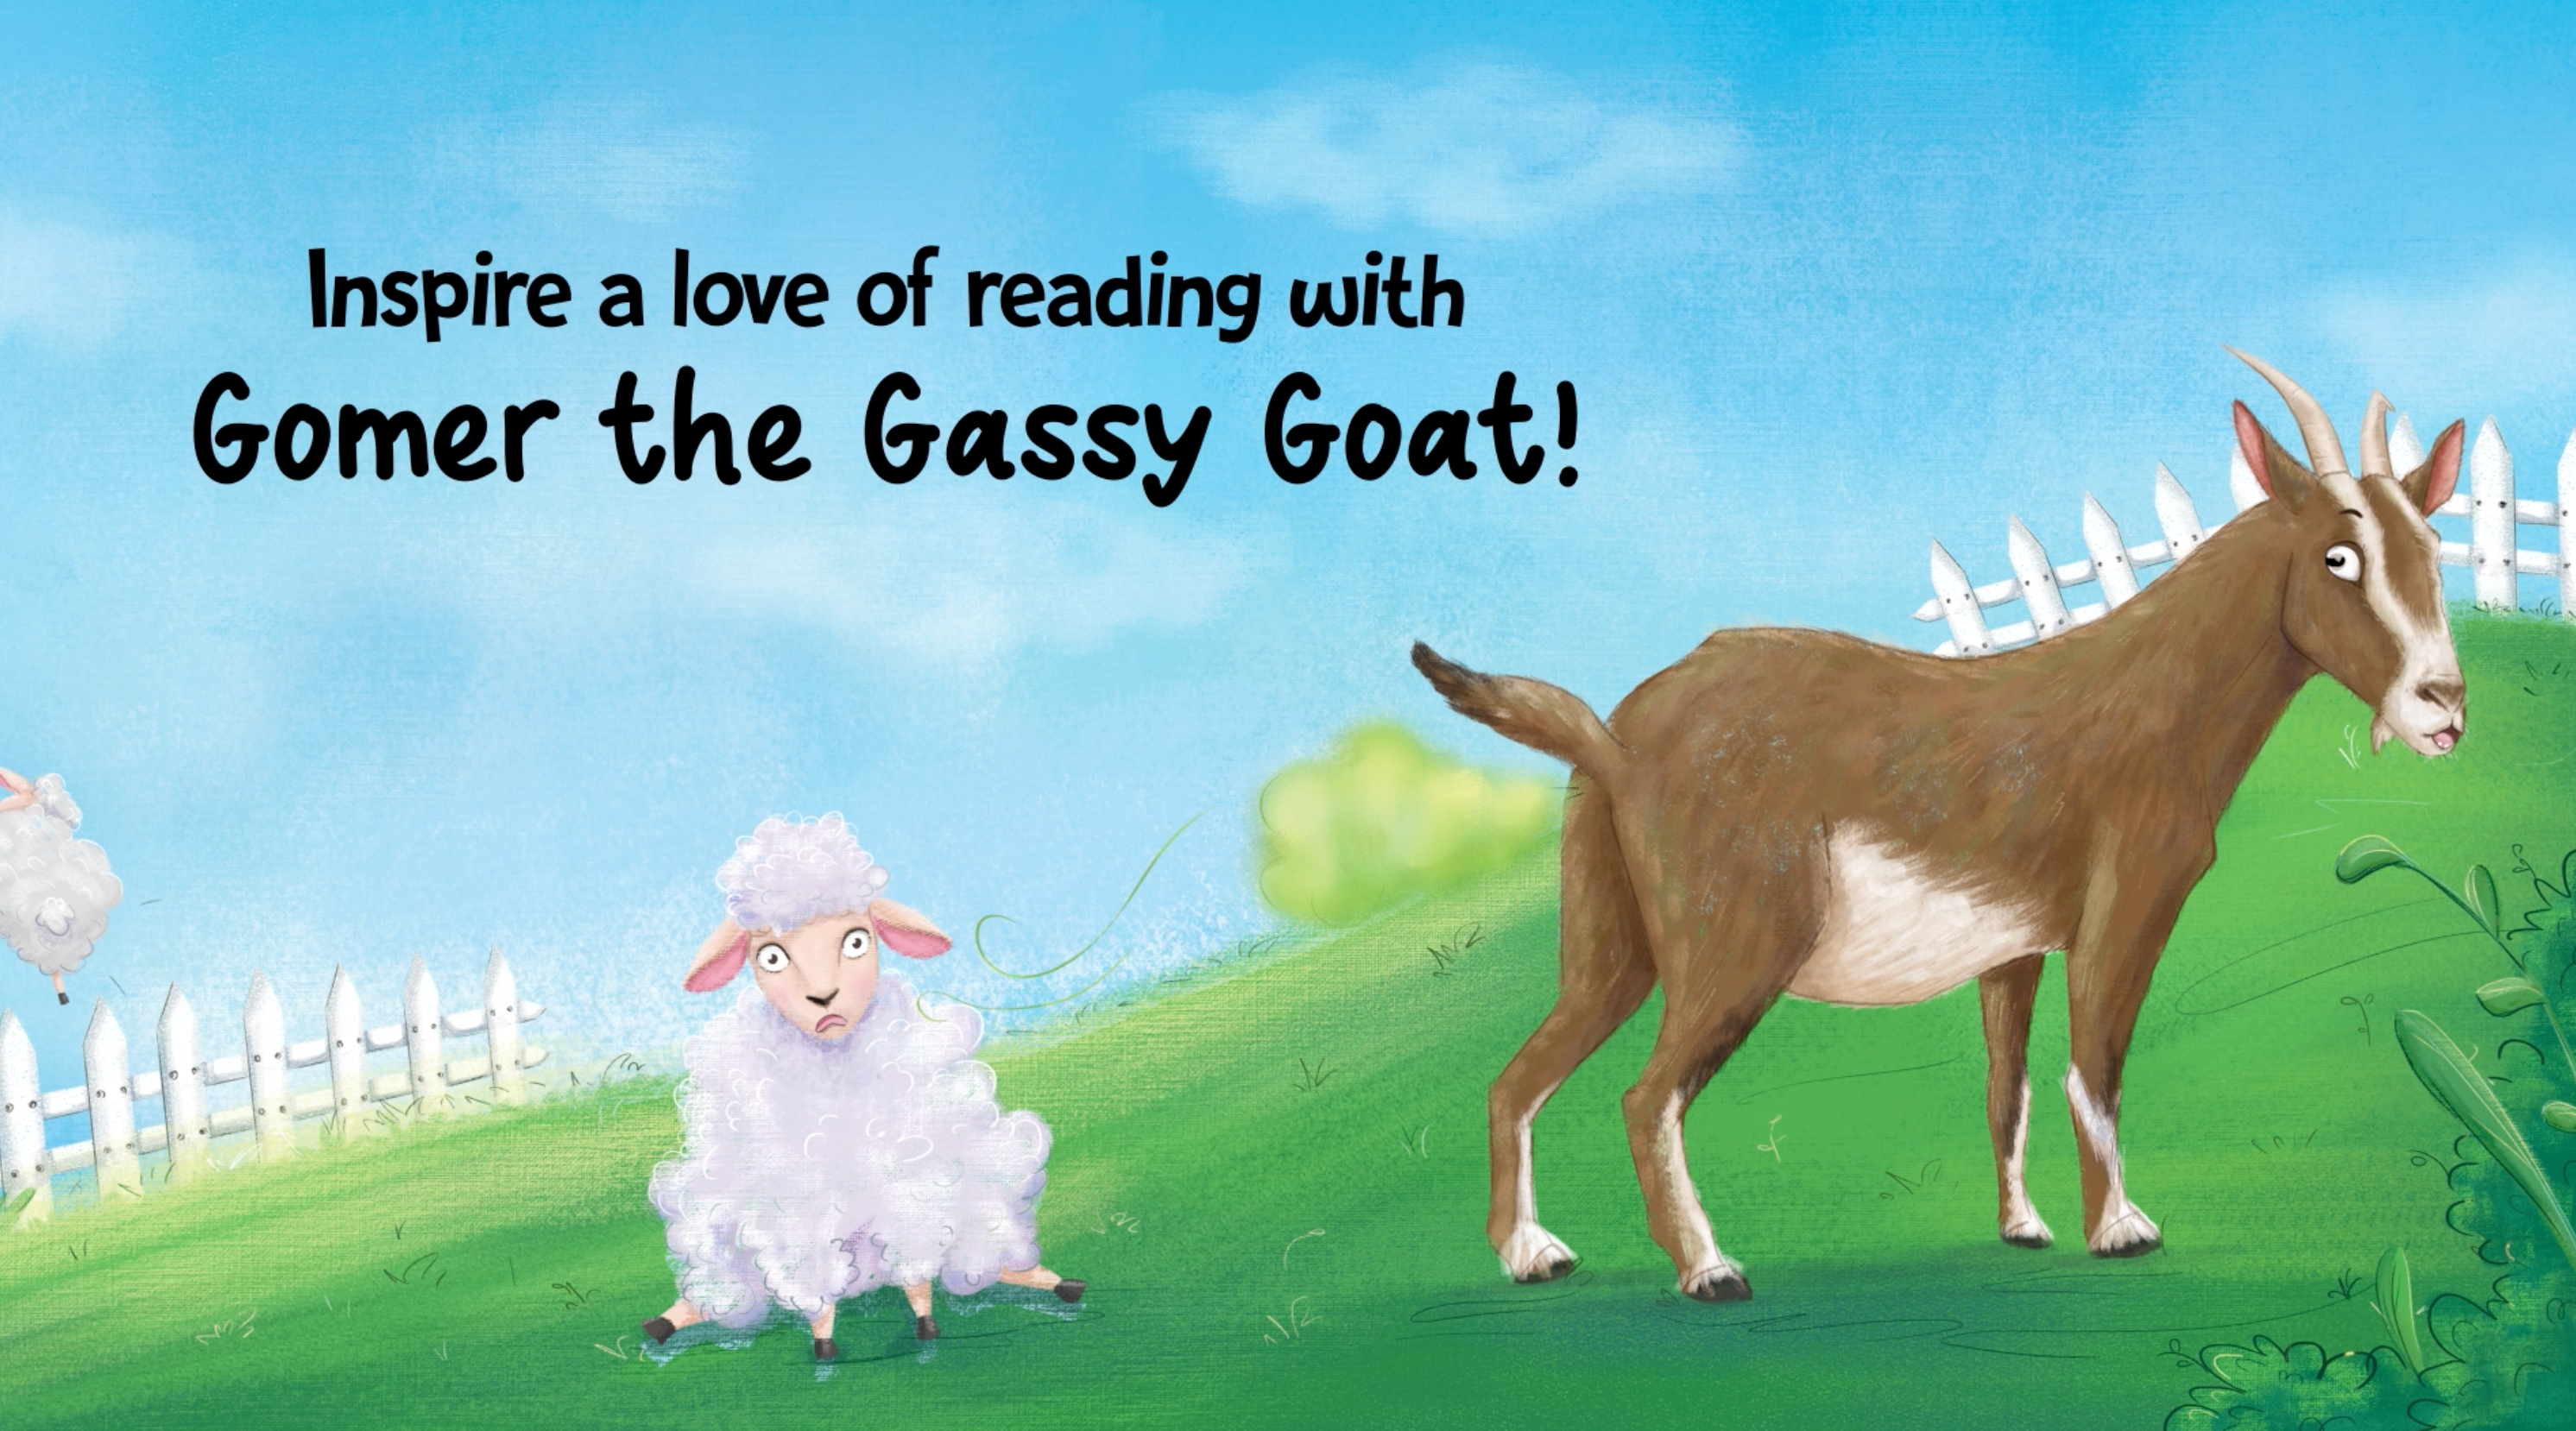 Load video: The Benefits of Gomer the Gassy Goat